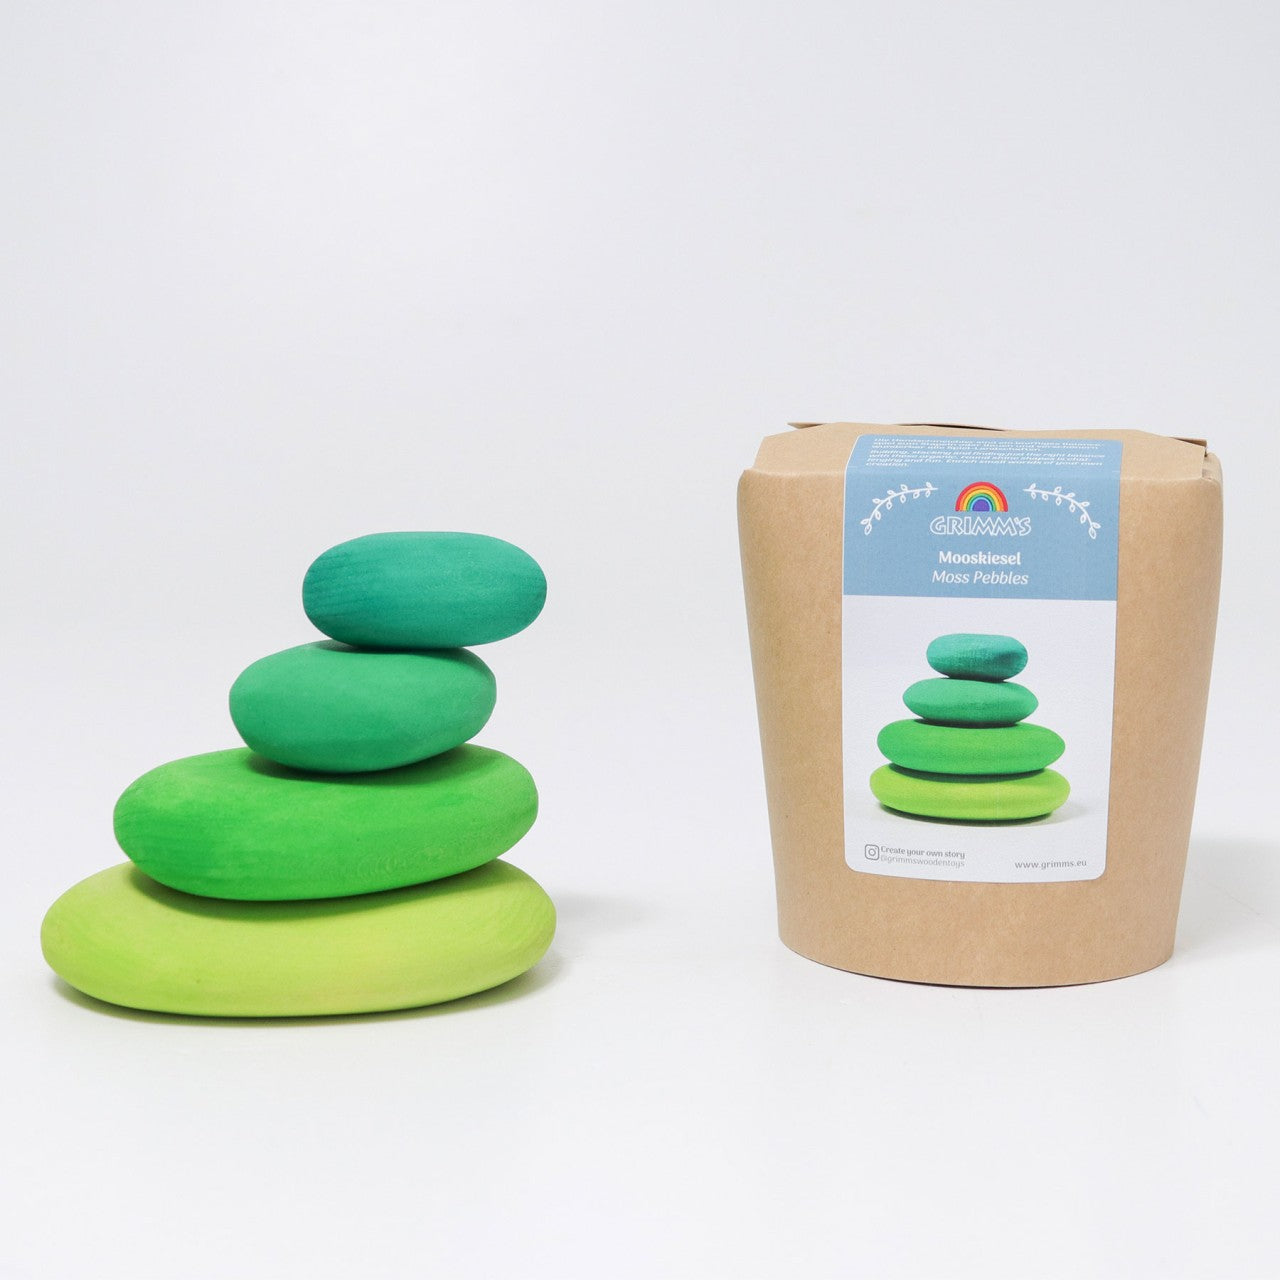 Moss Pebbles Building Set | Wooden Toys for Kids | Open-Ended Play